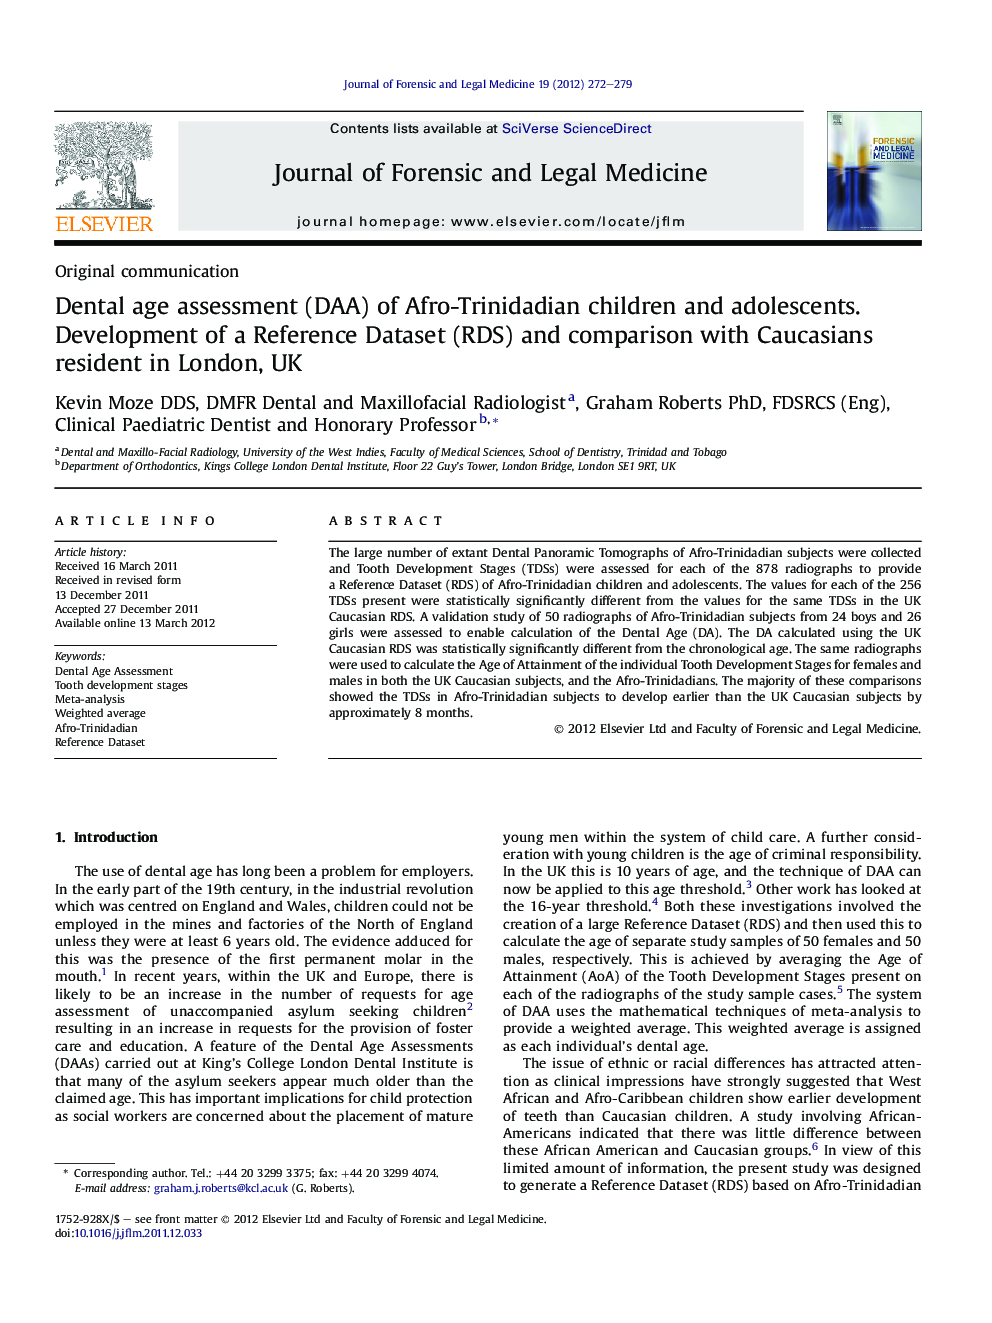 Dental age assessment (DAA) of Afro-Trinidadian children and adolescents. Development of a Reference Dataset (RDS) and comparison with Caucasians resident in London, UK